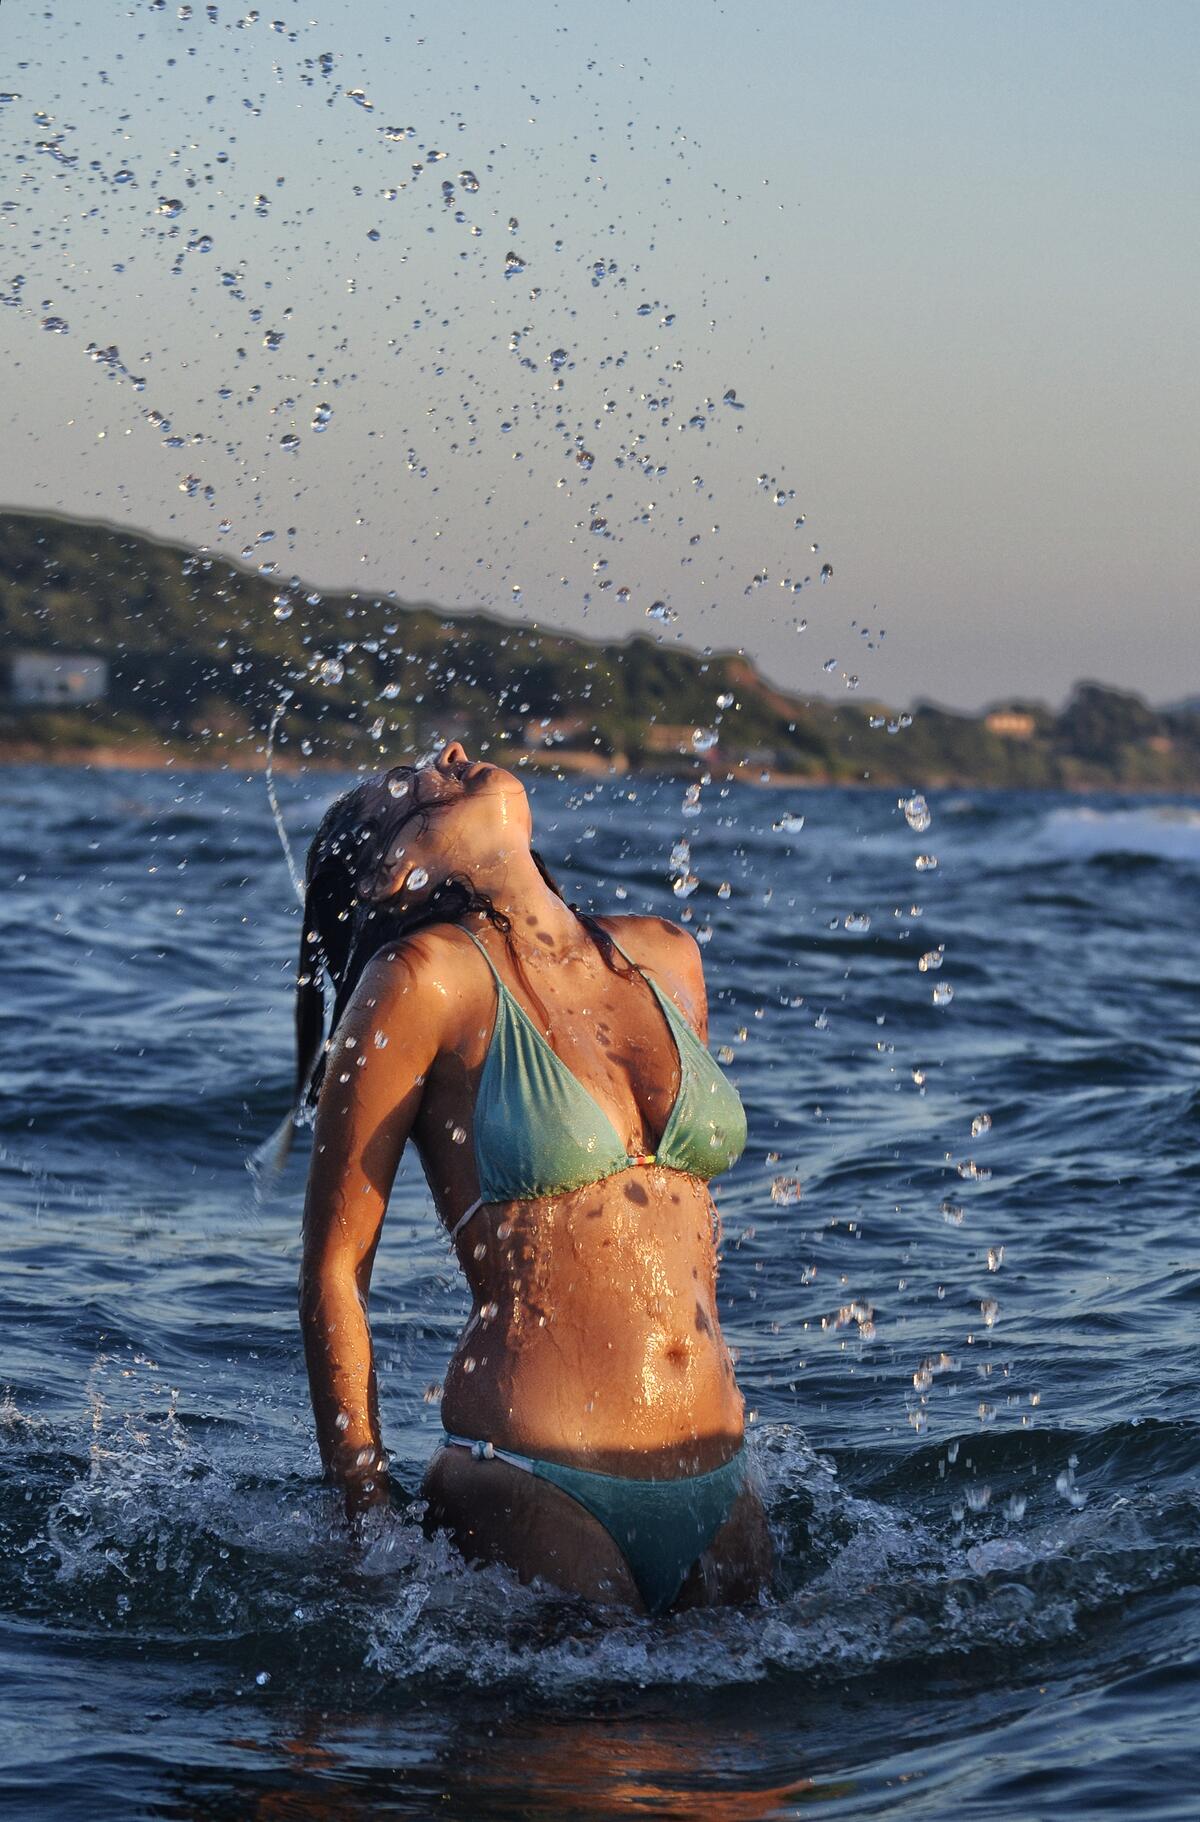 A girl with a beautiful body goes into the water